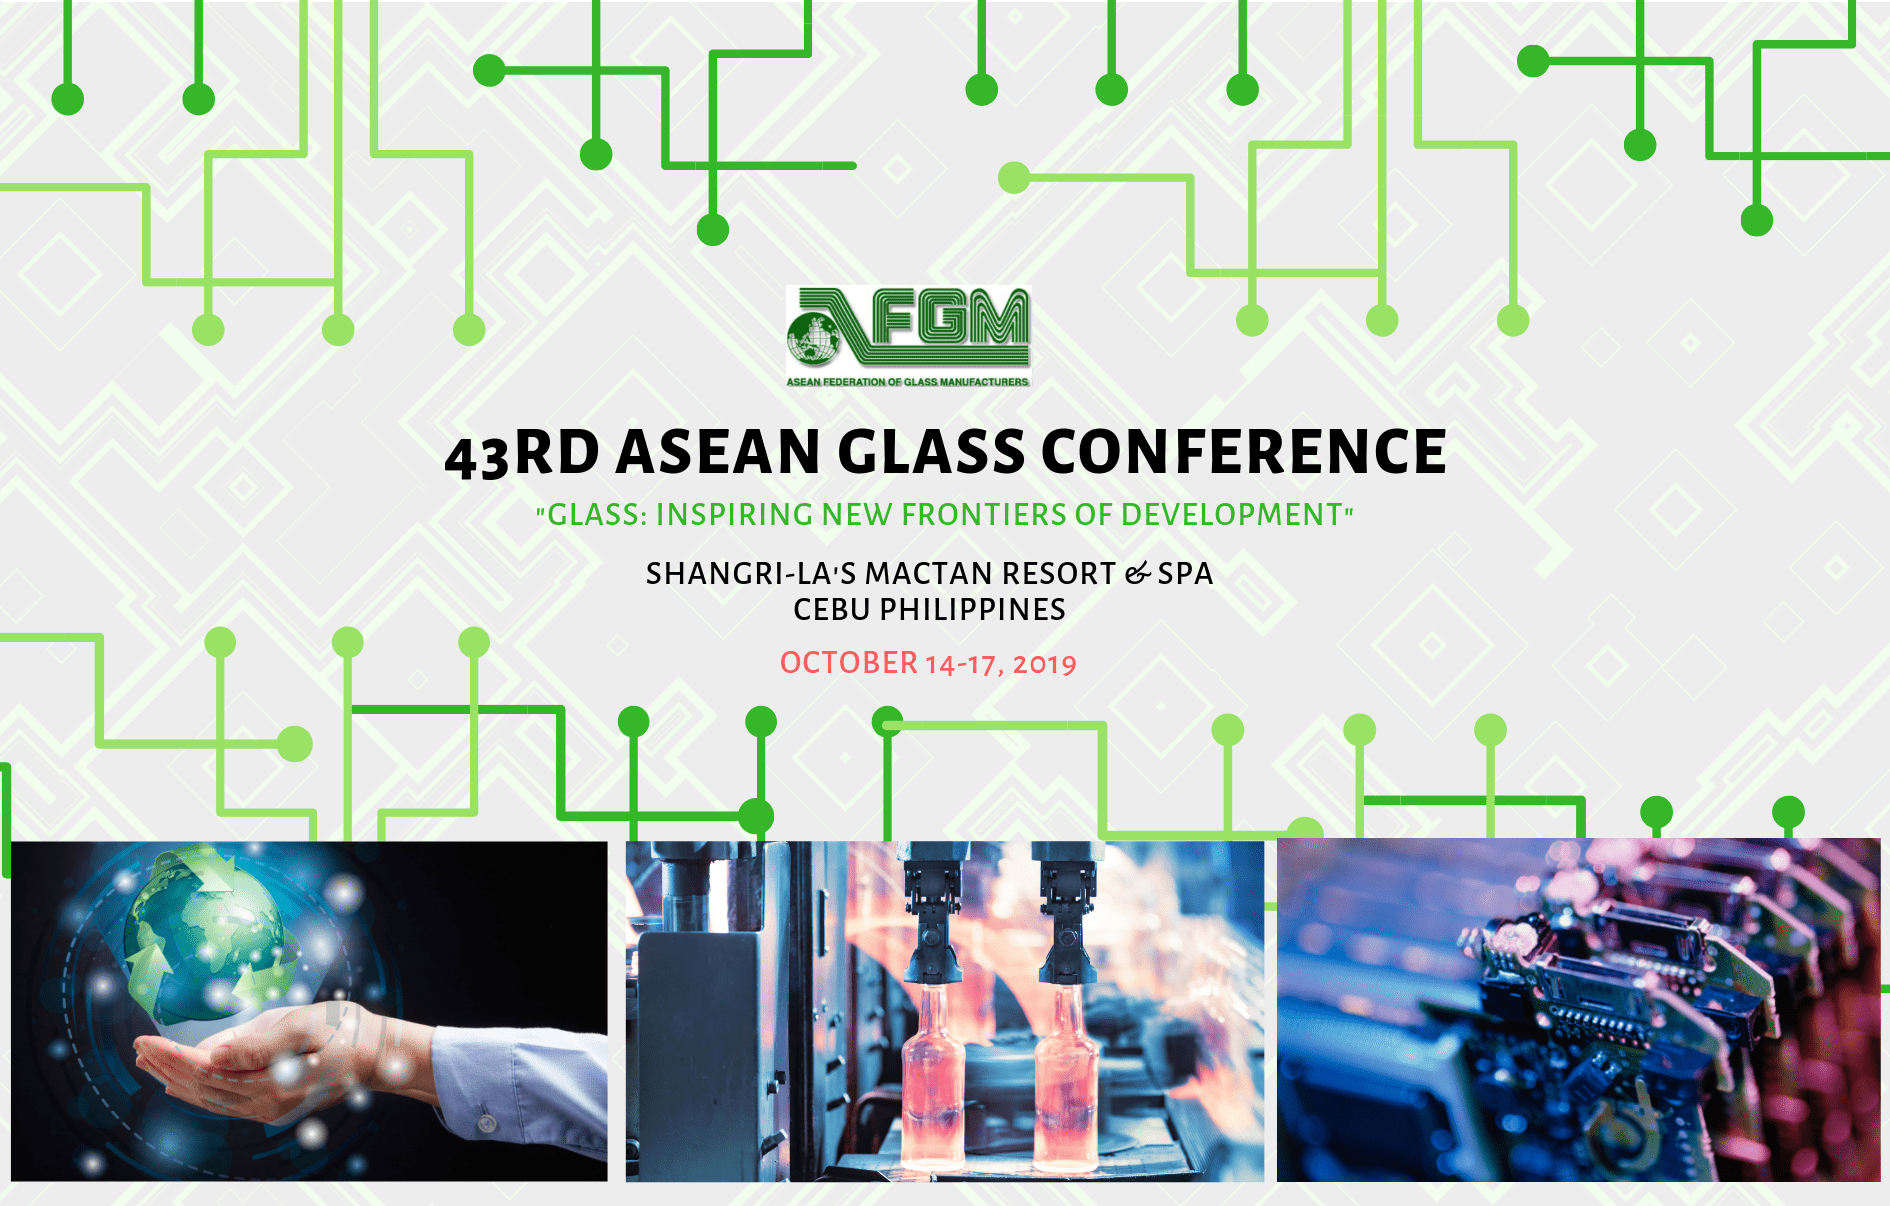 43rd ASEAN GLASS CONFERENCE